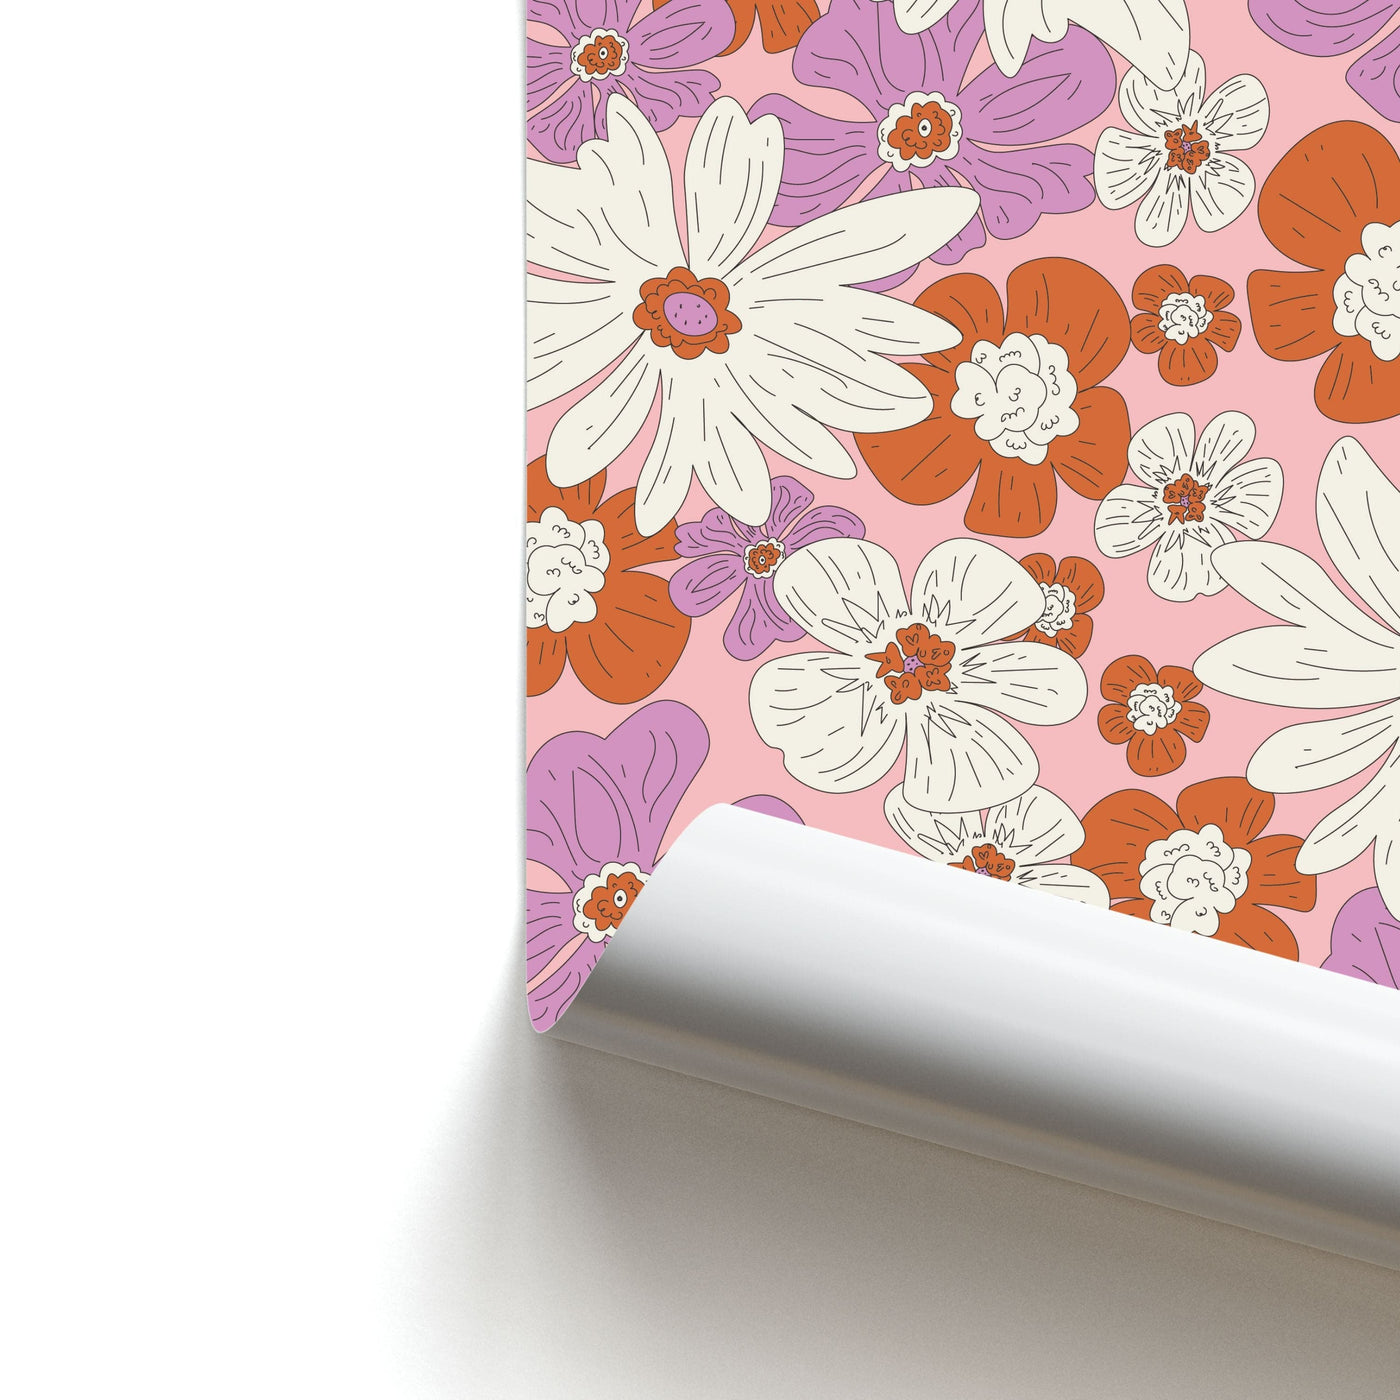 Retro Flowers - Floral Patterns Poster